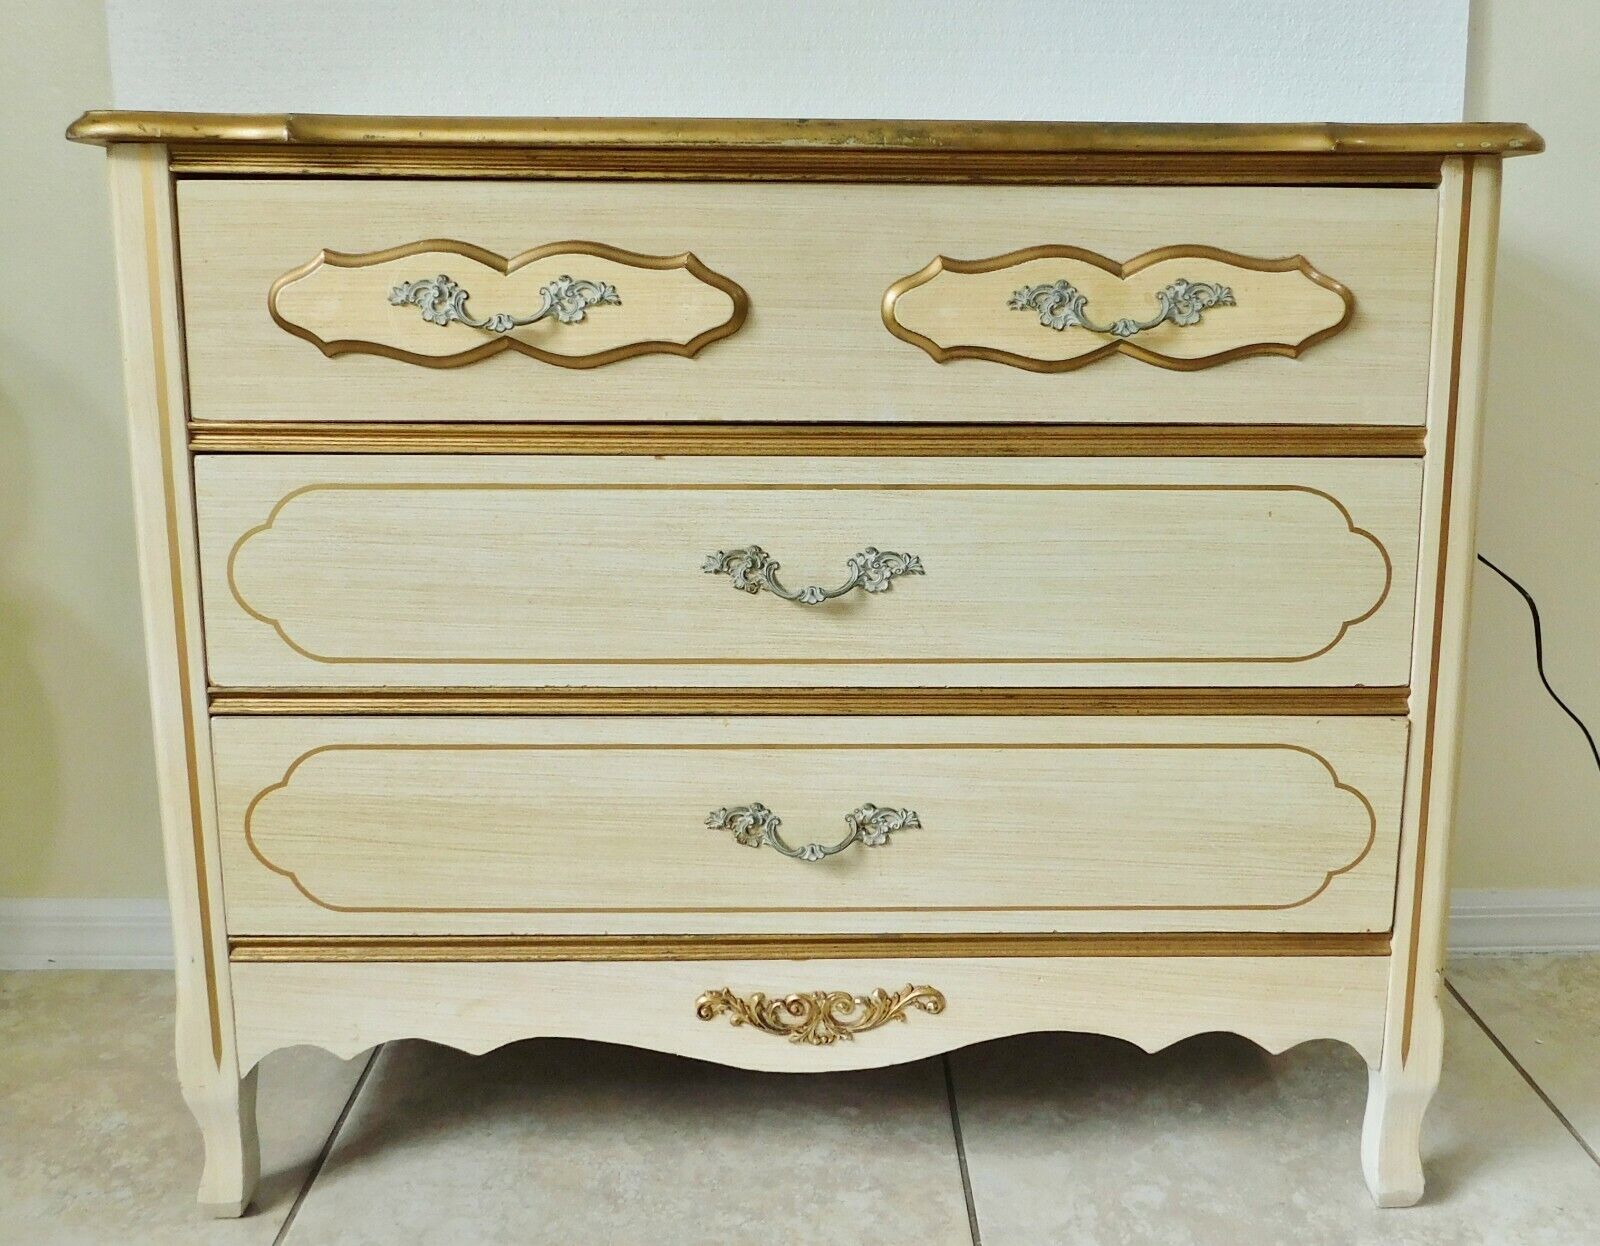 Vintage 38" Gold & Ivory French Provincial Wood Chest of 3 Drawers Dresser